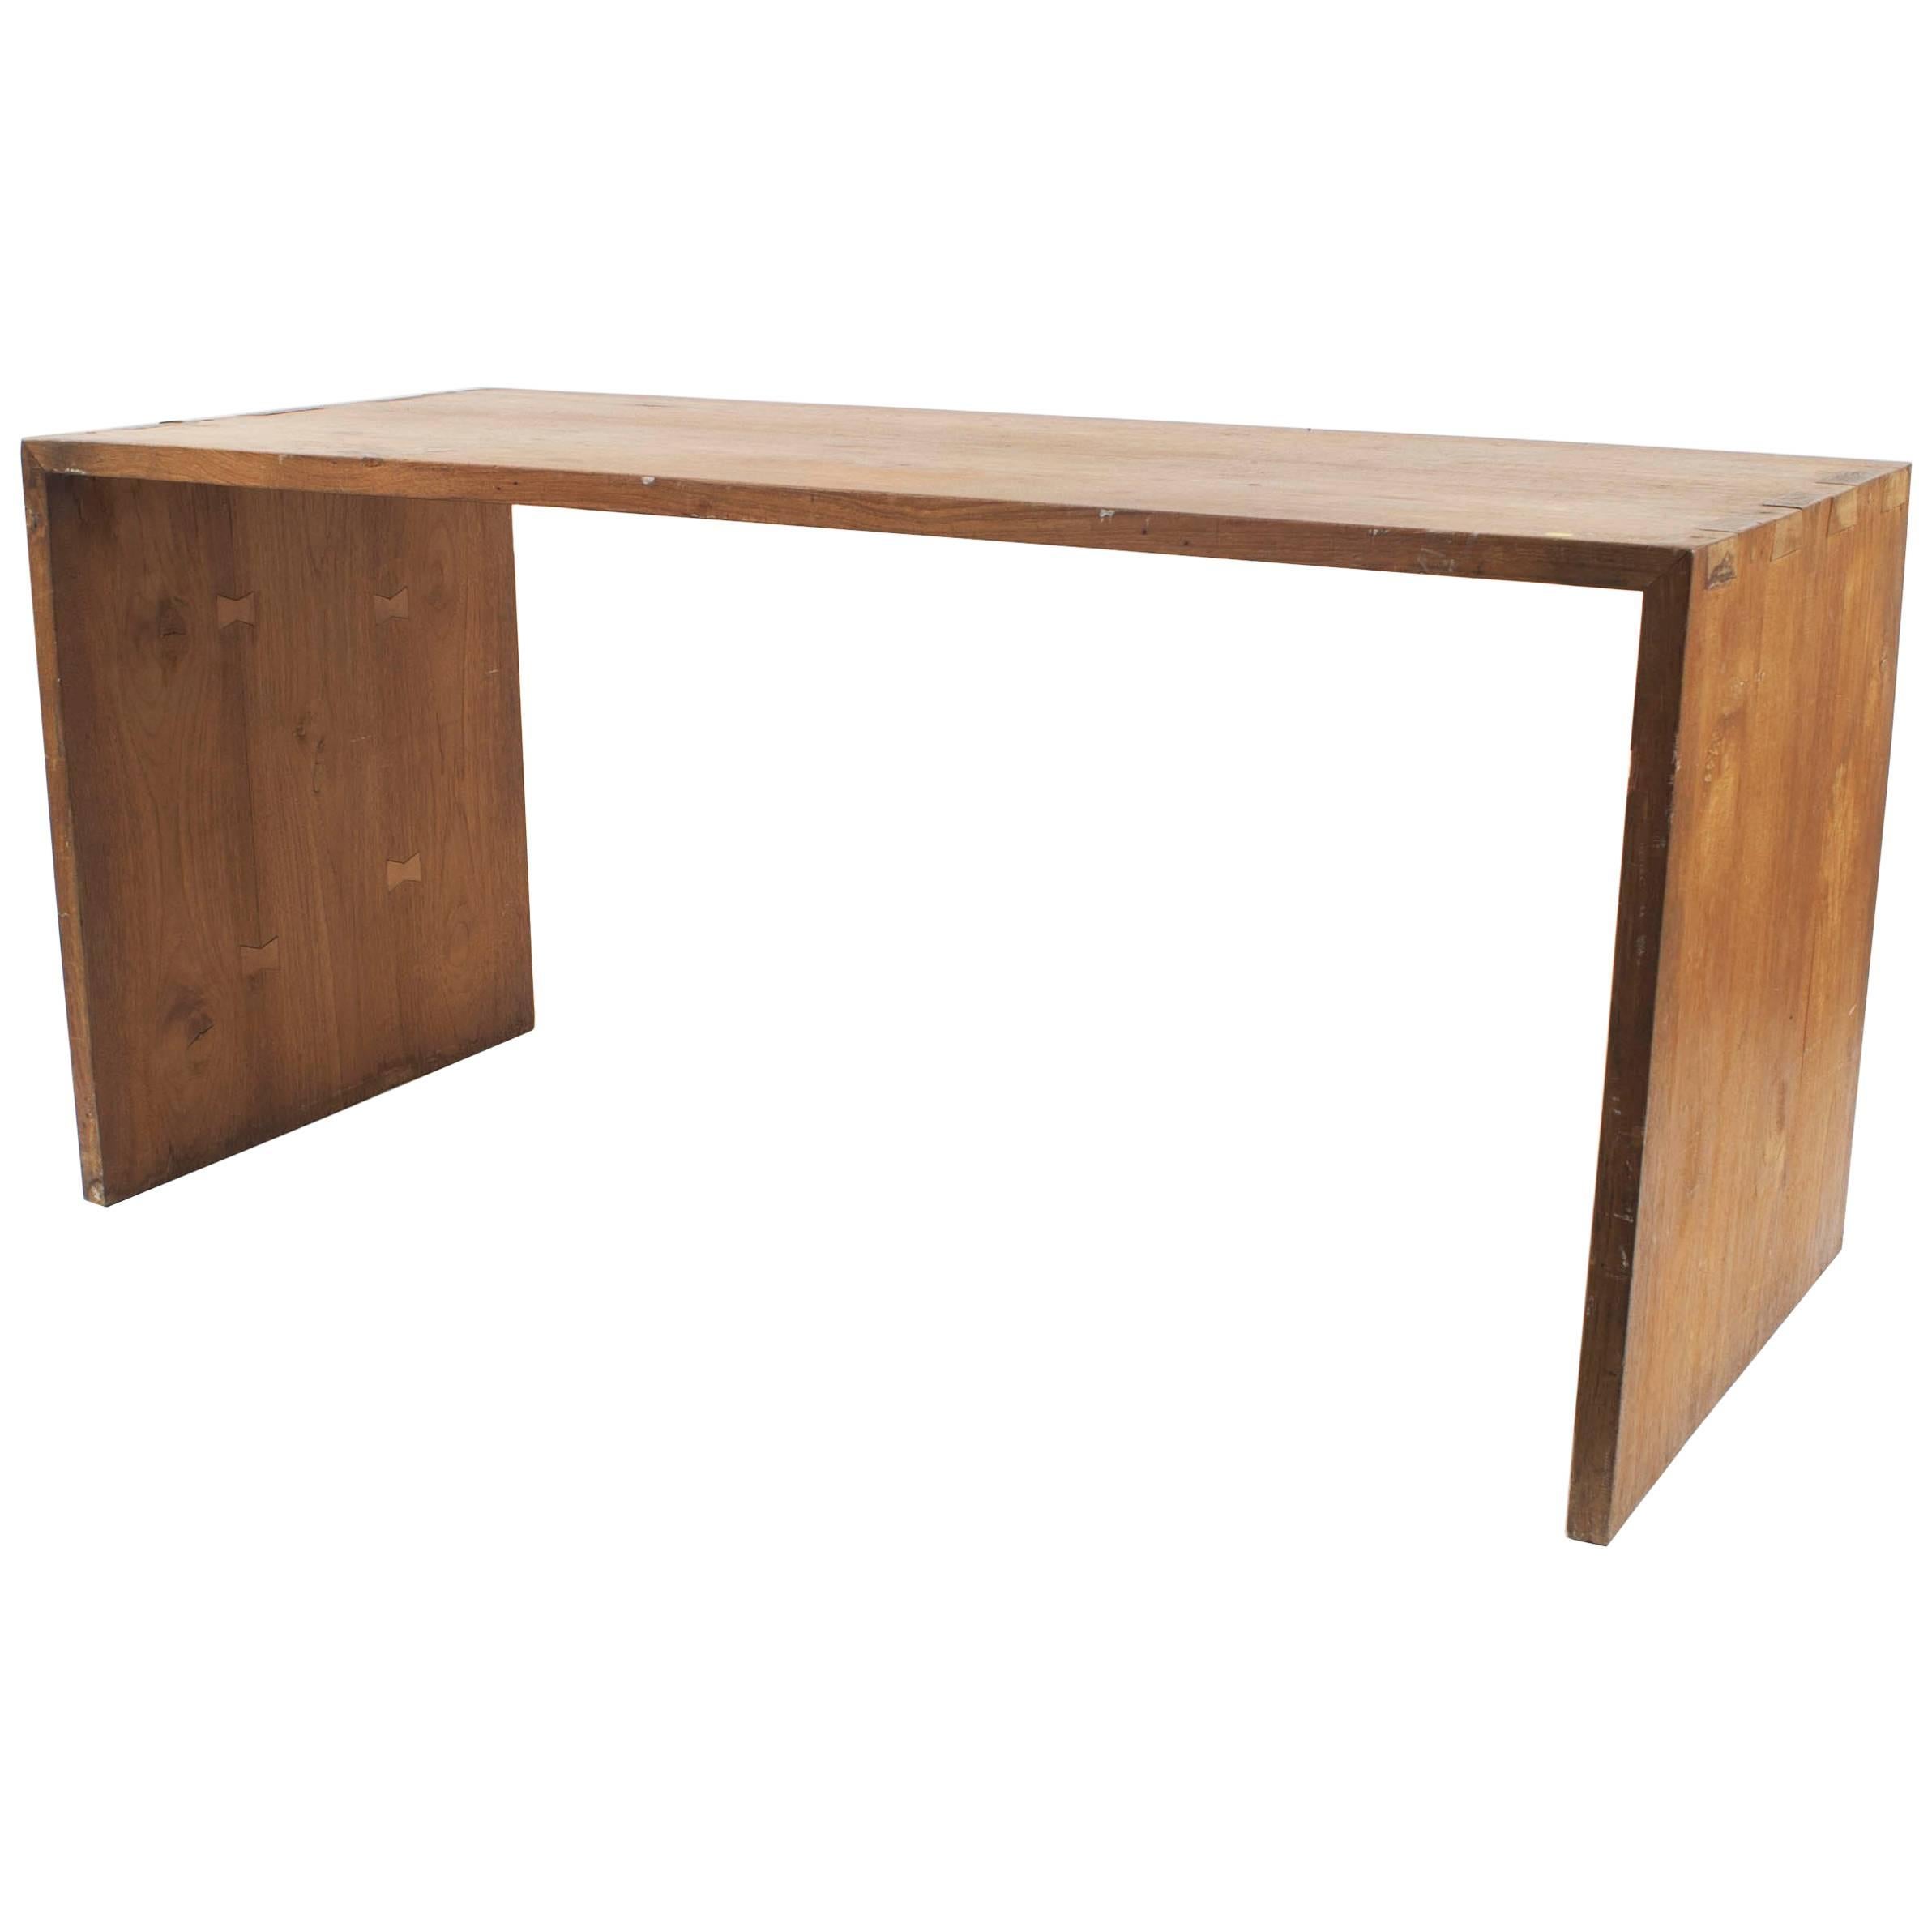 Post War Minimalist Pine Table Desk with Exposed Dovetails